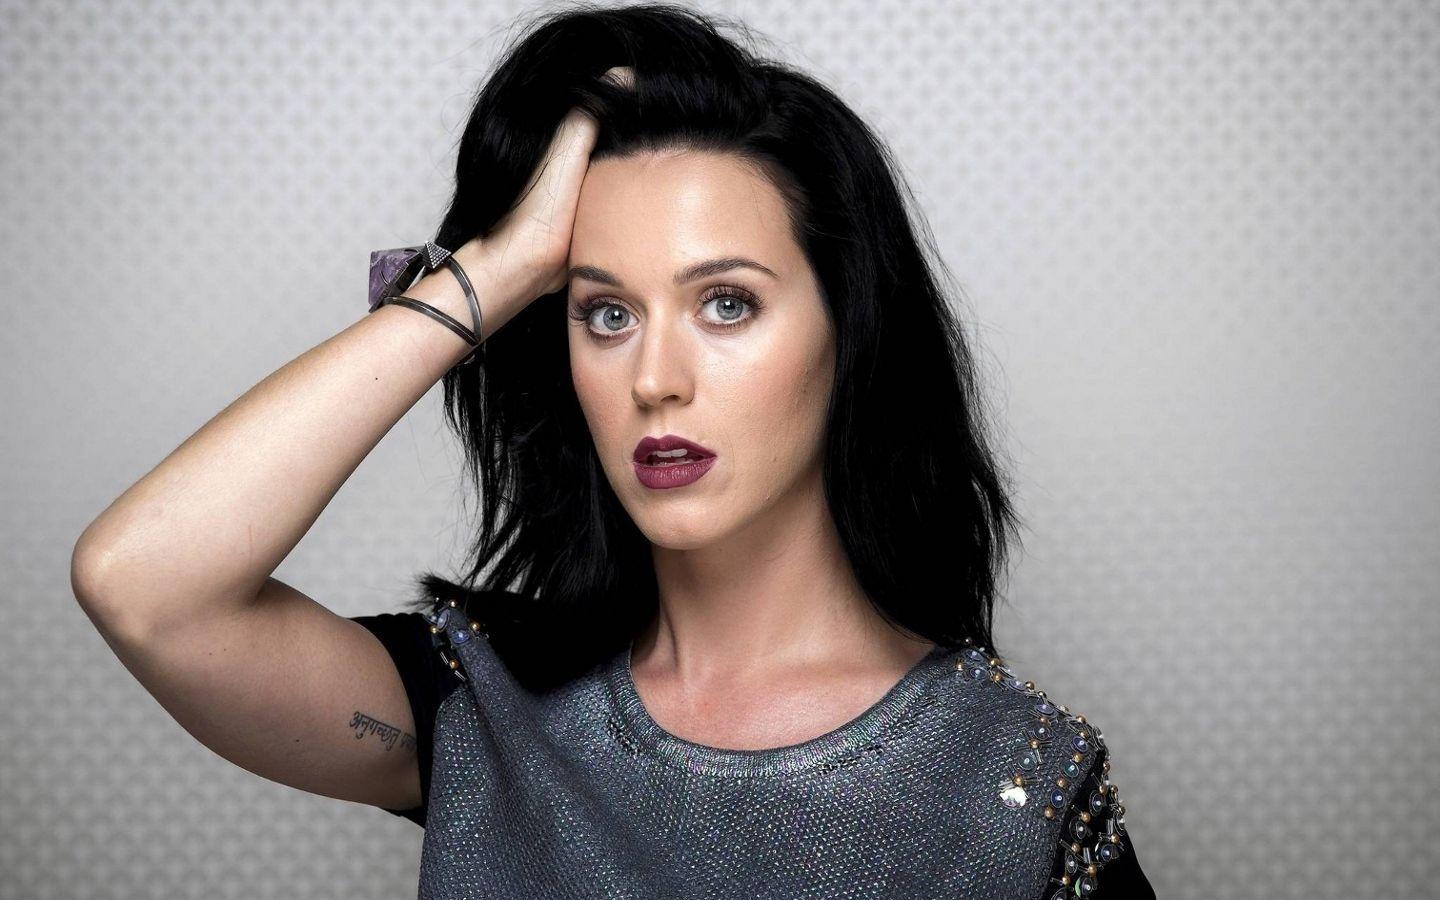 Schedule 2015 Katy Perry Upcoming Tour, Concert, Date, Place